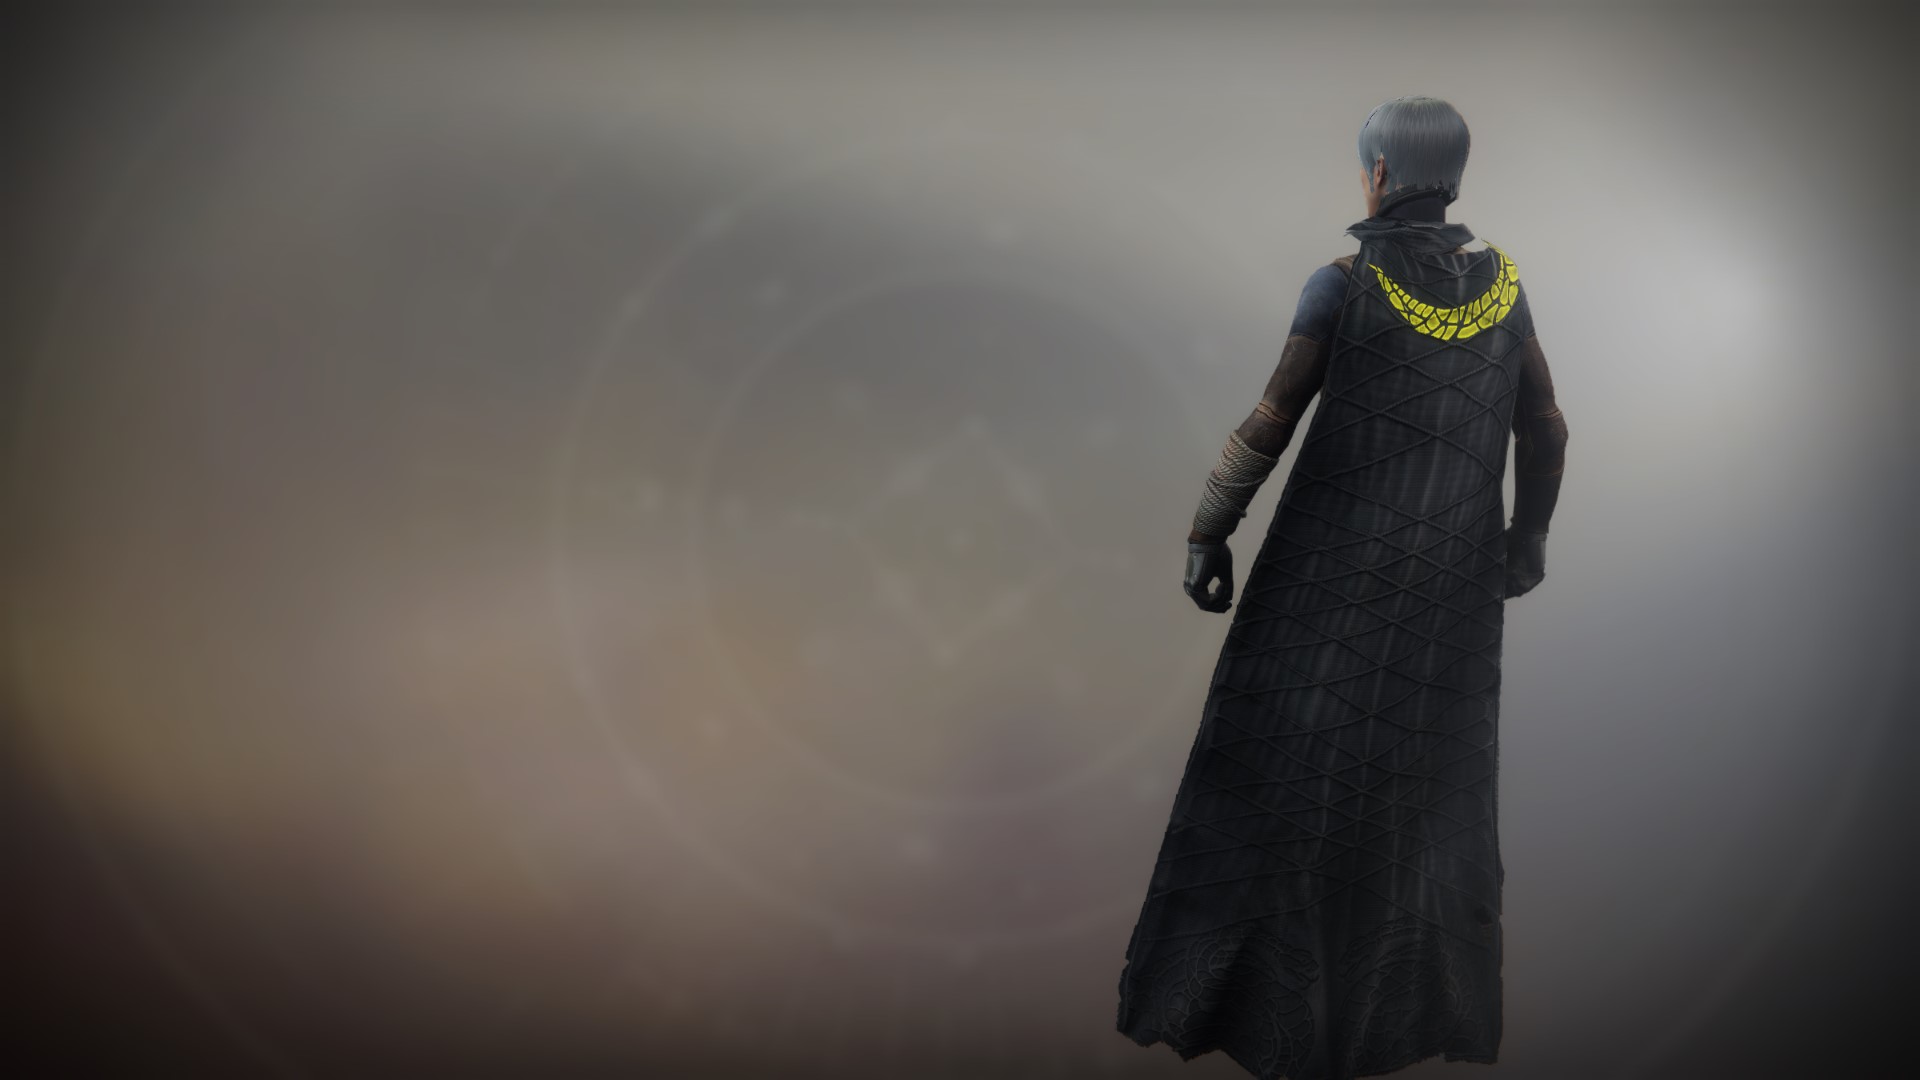 An in-game render of the Illicit Sentry Cloak.